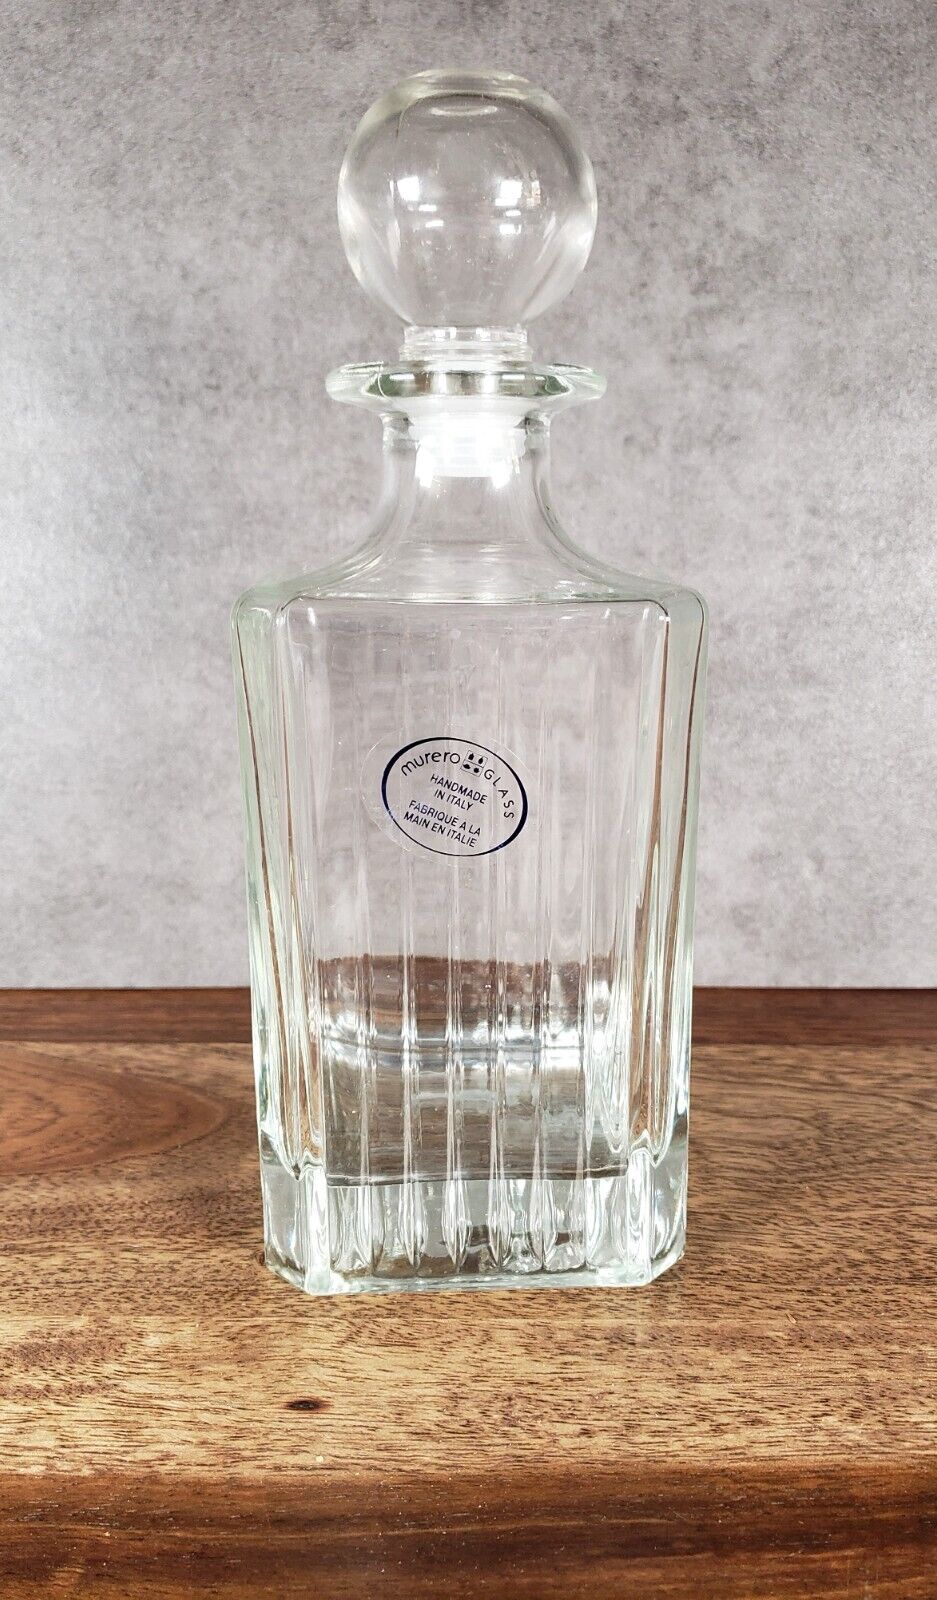 Vintage Murero Clear glass whiskey decanter Handmade in Italy w/ glass stopper